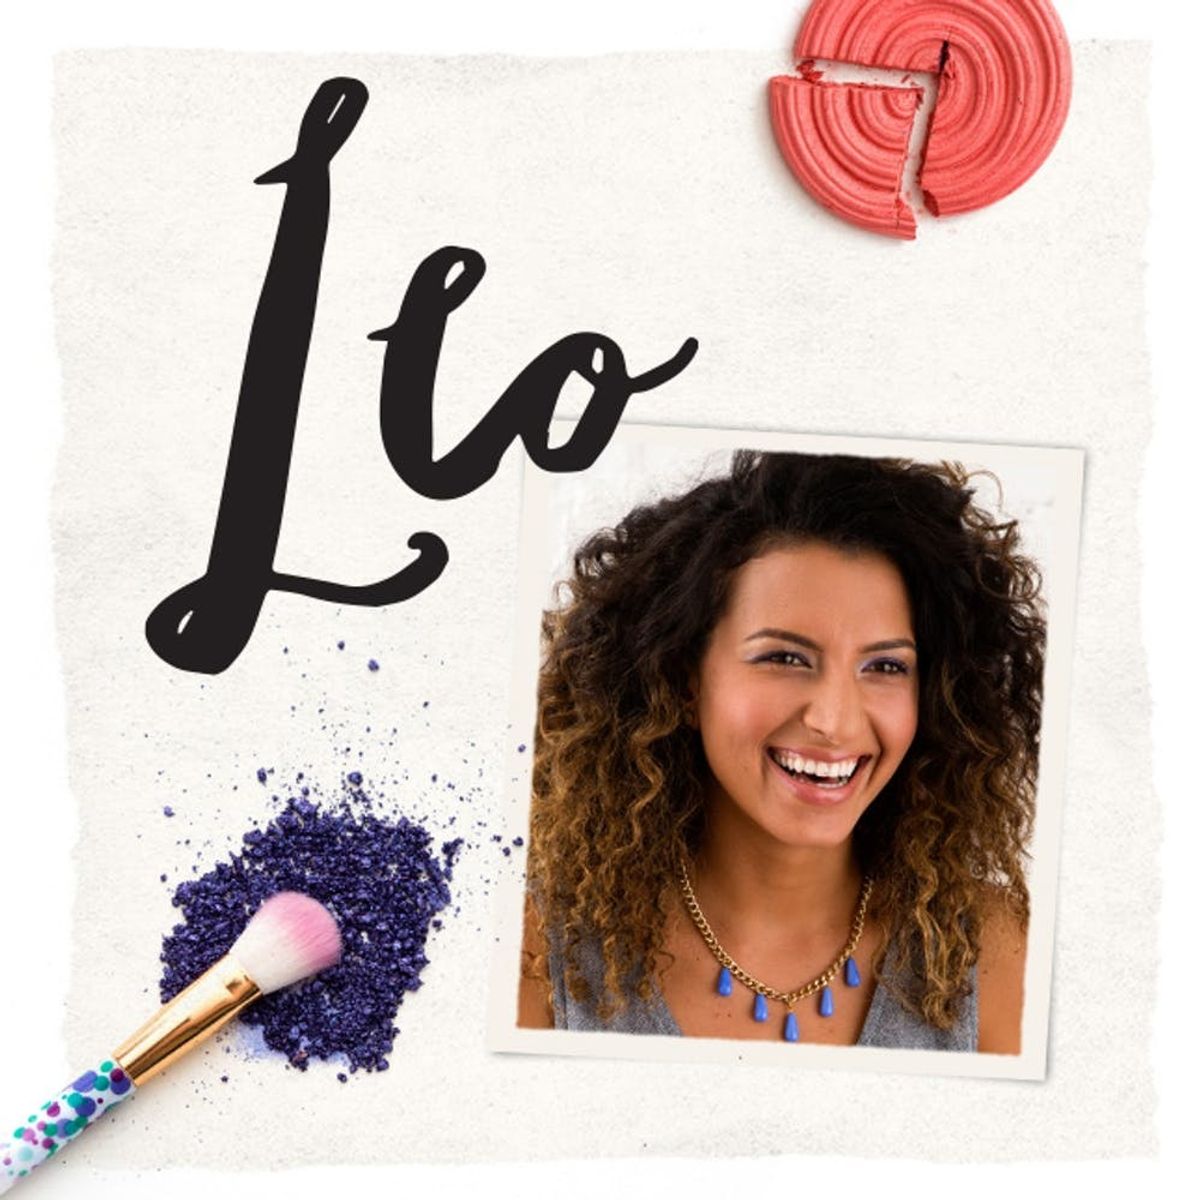 The Best Makeup for Your Zodiac Sign: Leo Edition